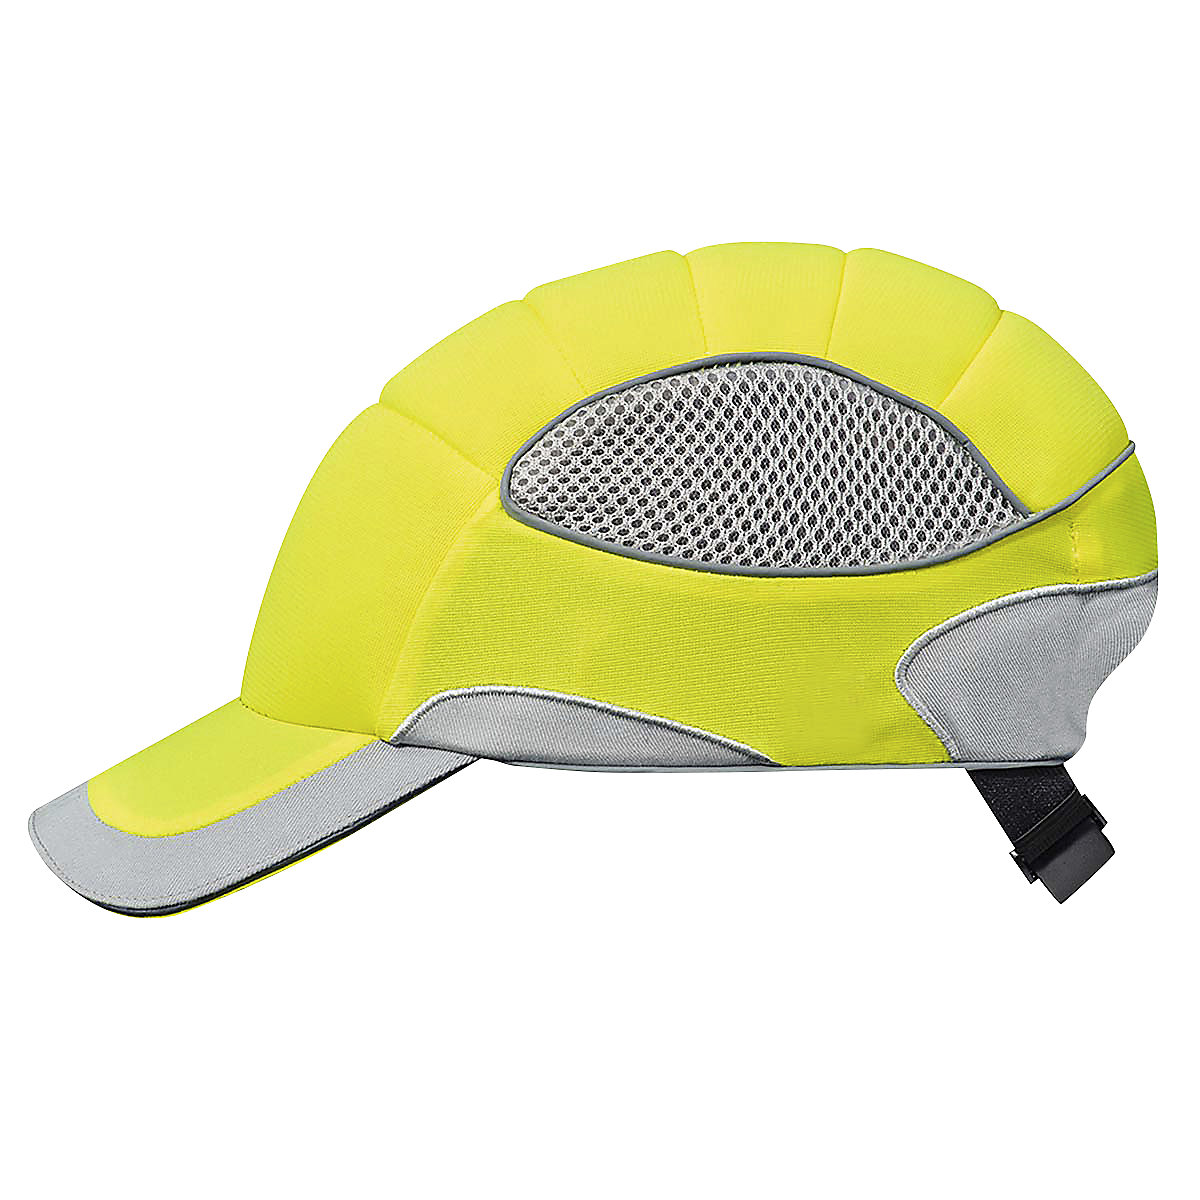 Bump cap with ABS shell – VOSS HELME